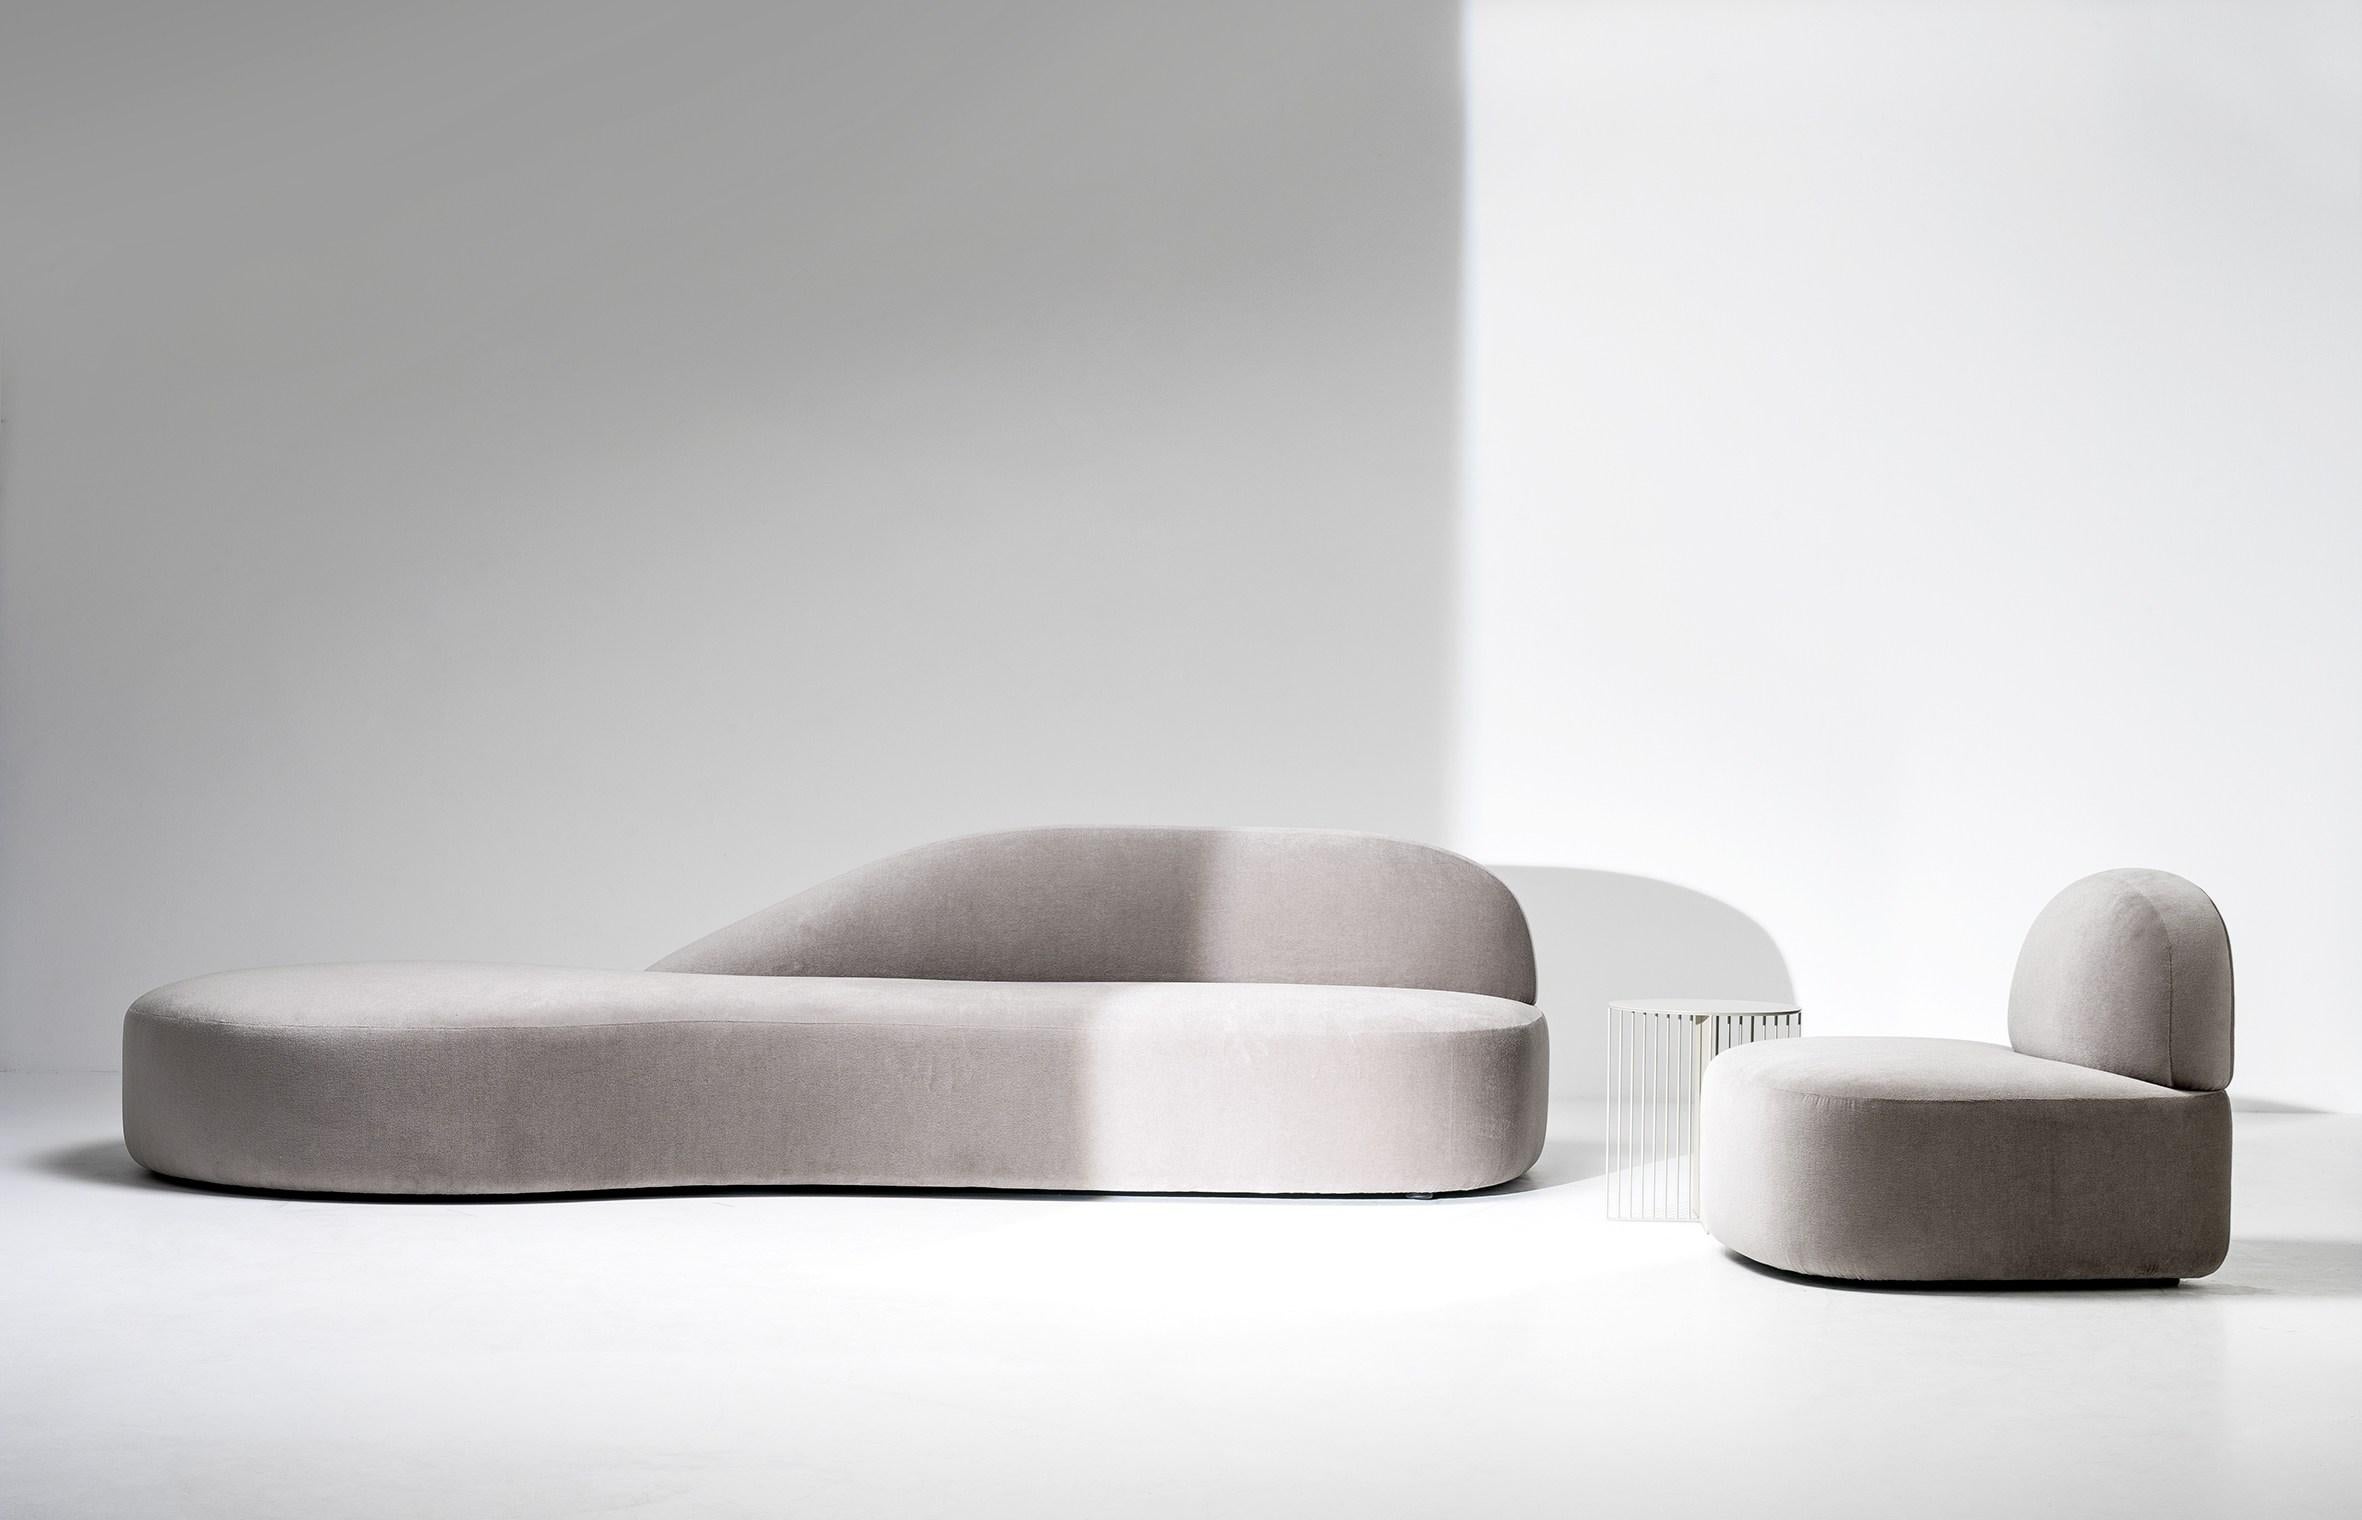 Handcrafted sculptural sofa with curvy sweeping lines and plush seating. This sofa offers a unique comfortable seating experience created in a masterful Italian production process. The sofa is heavily constructed with reinforced frame and